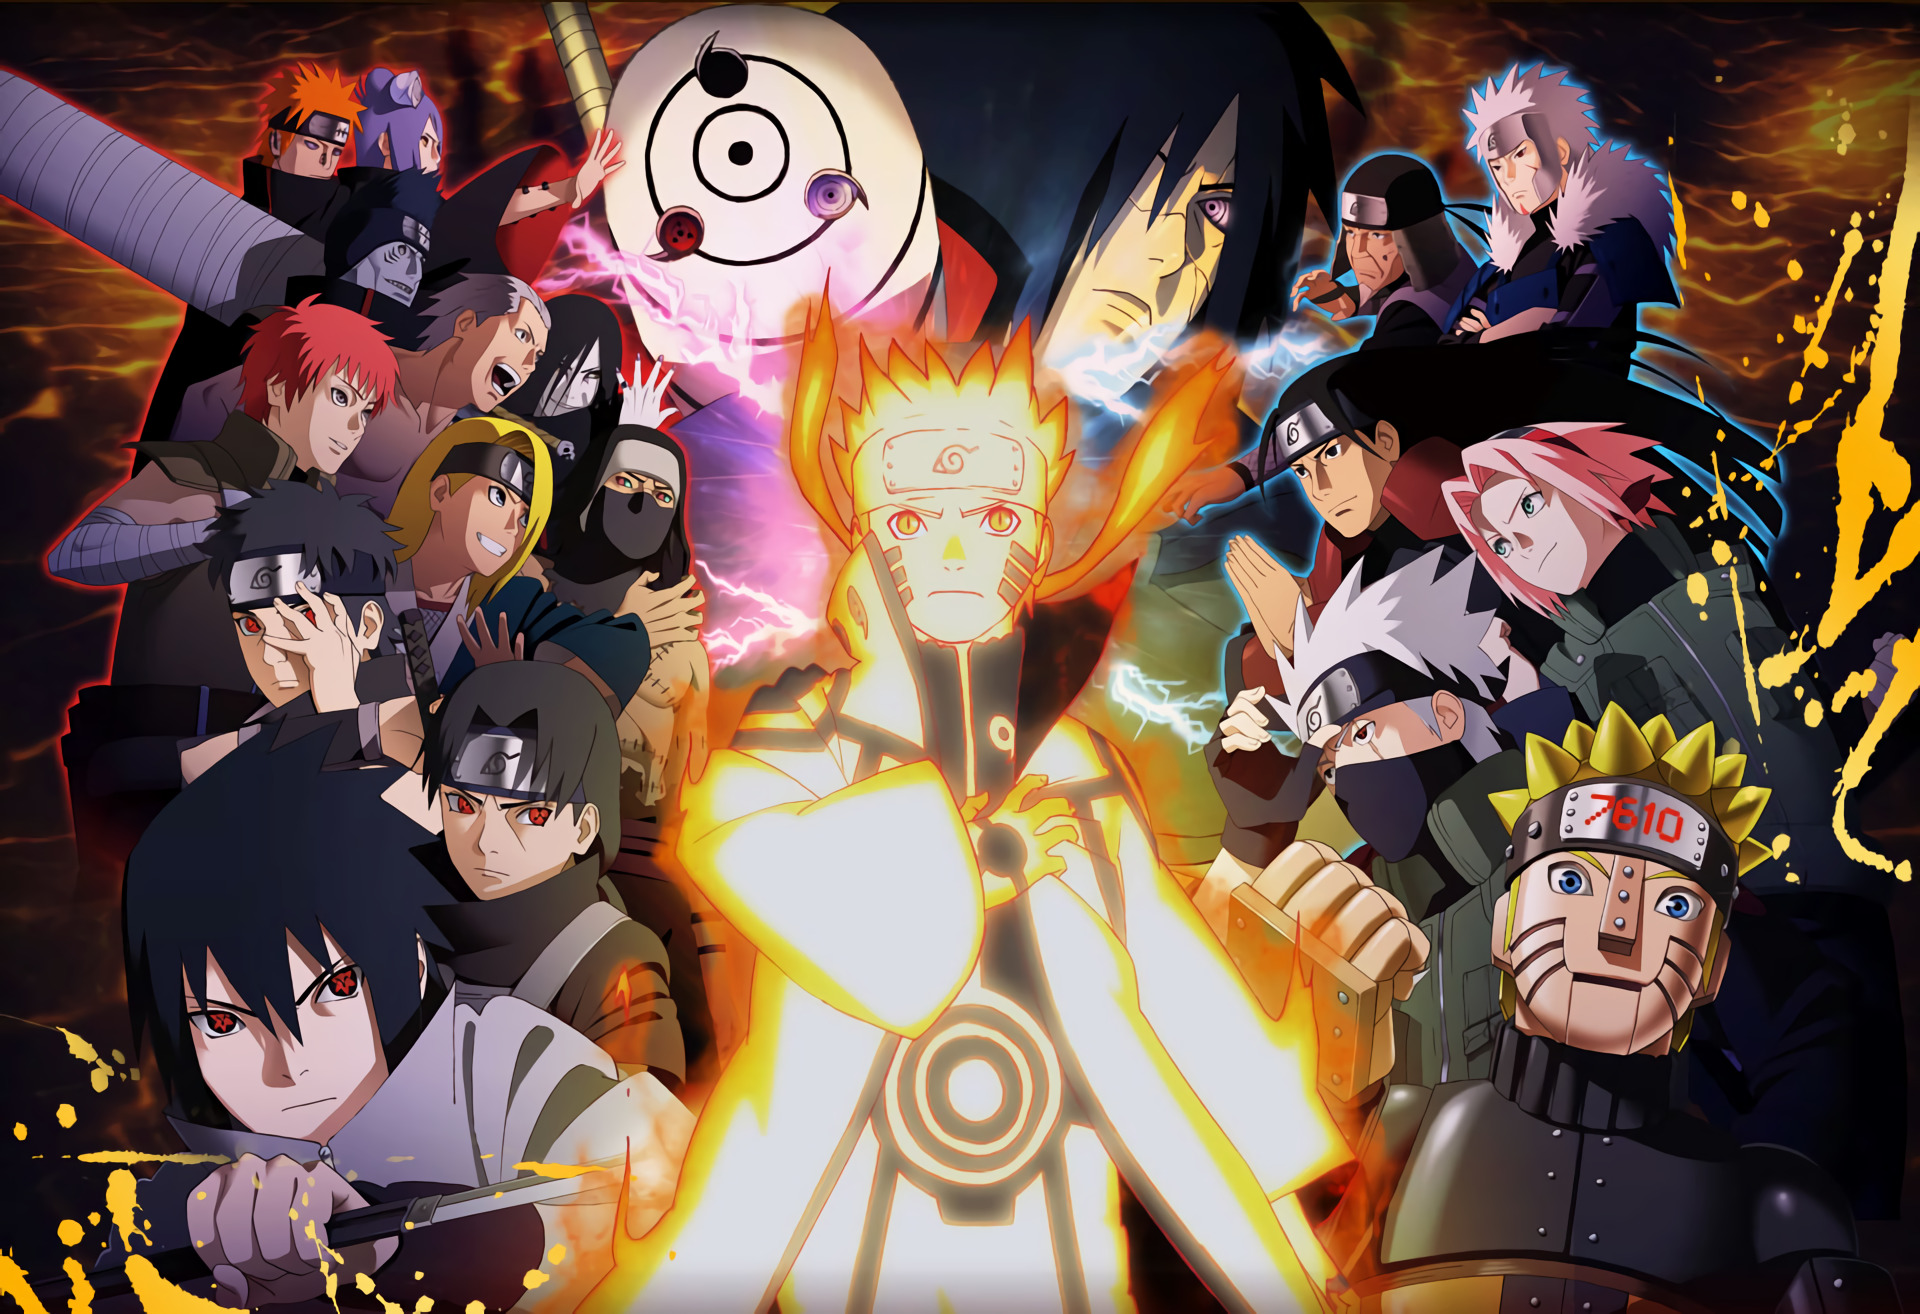 Naruto Shippuden: The Two Saviors Big Adventure! The Quest for the